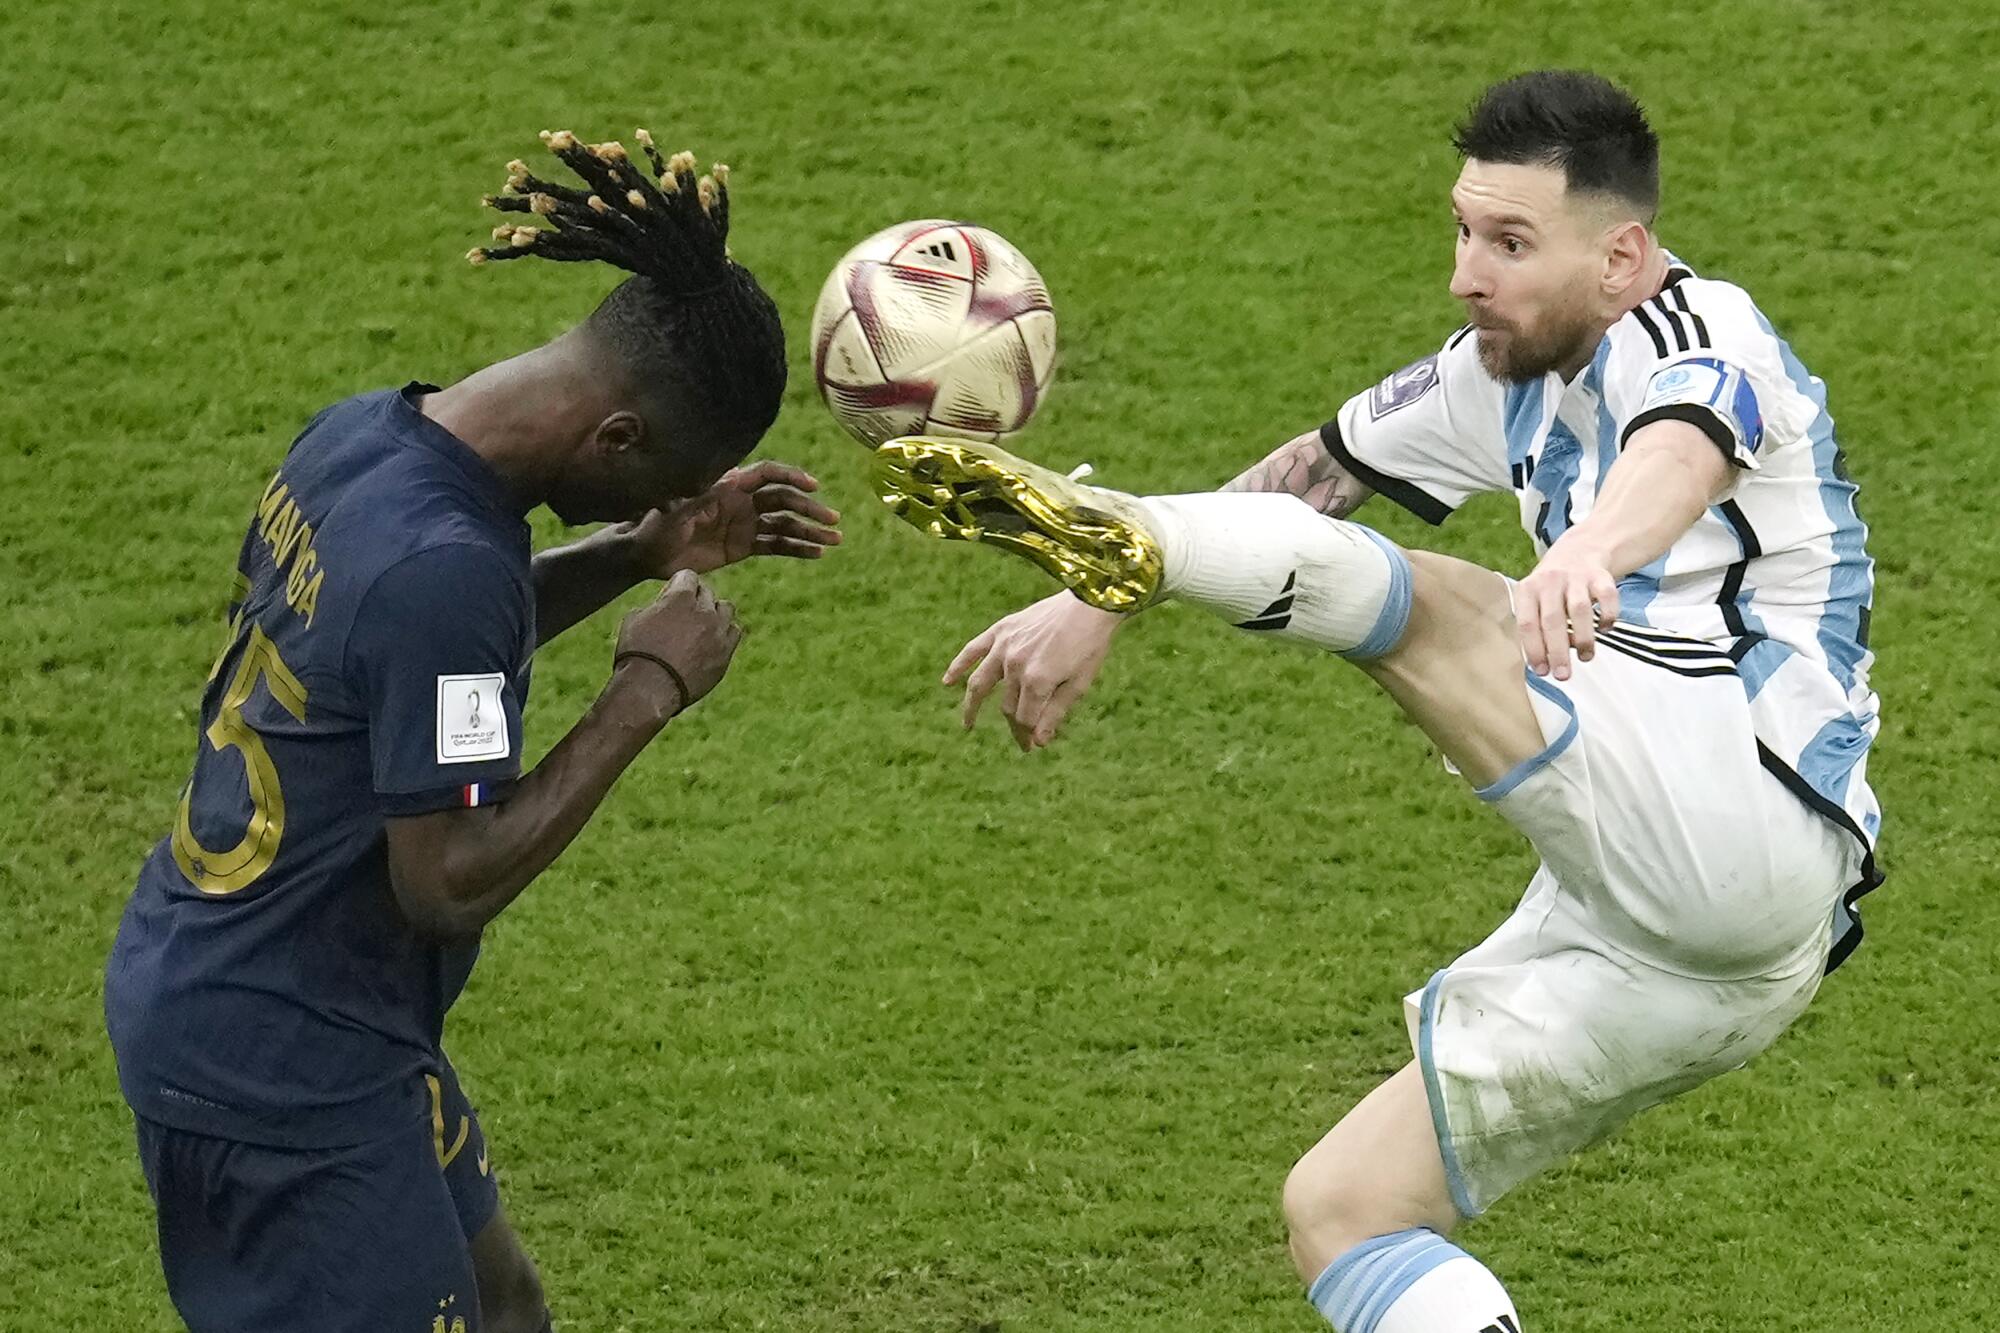 Argentina's Lionel Messi and France's Eduardo Camavinga aim for the ball while in mid-air.